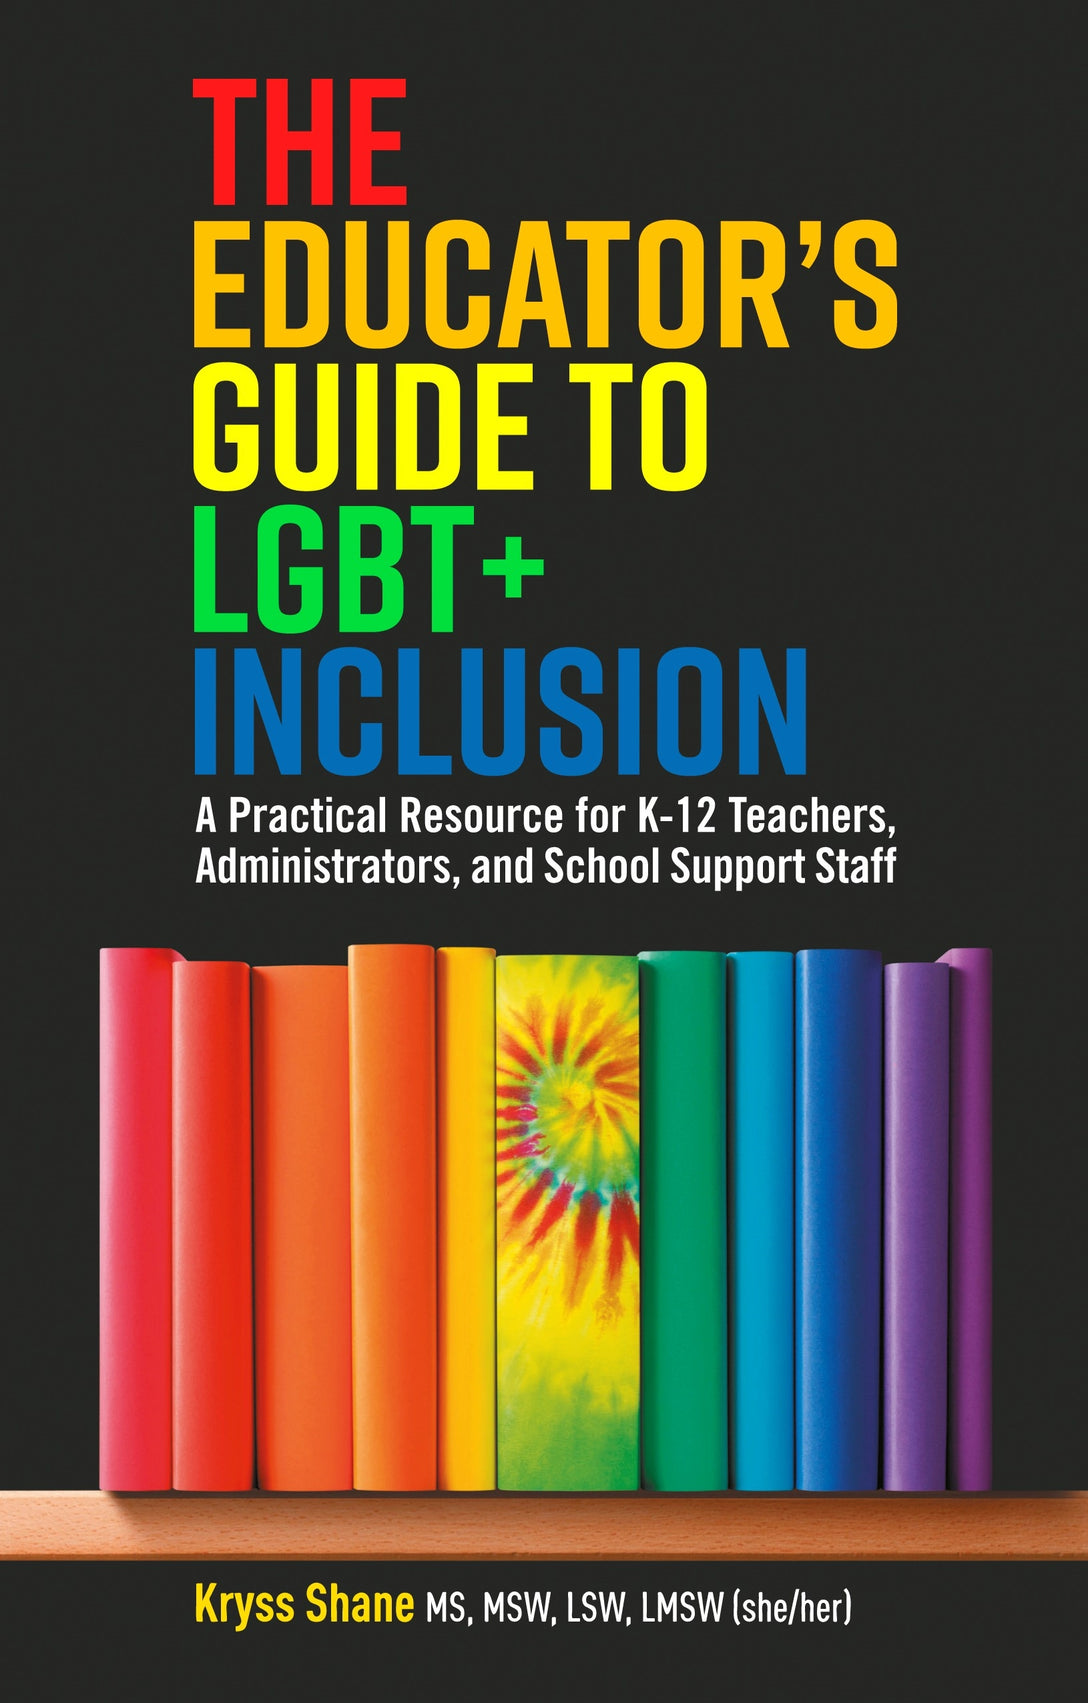 The Educator's Guide to LGBT+ Inclusion by Kryss Shane